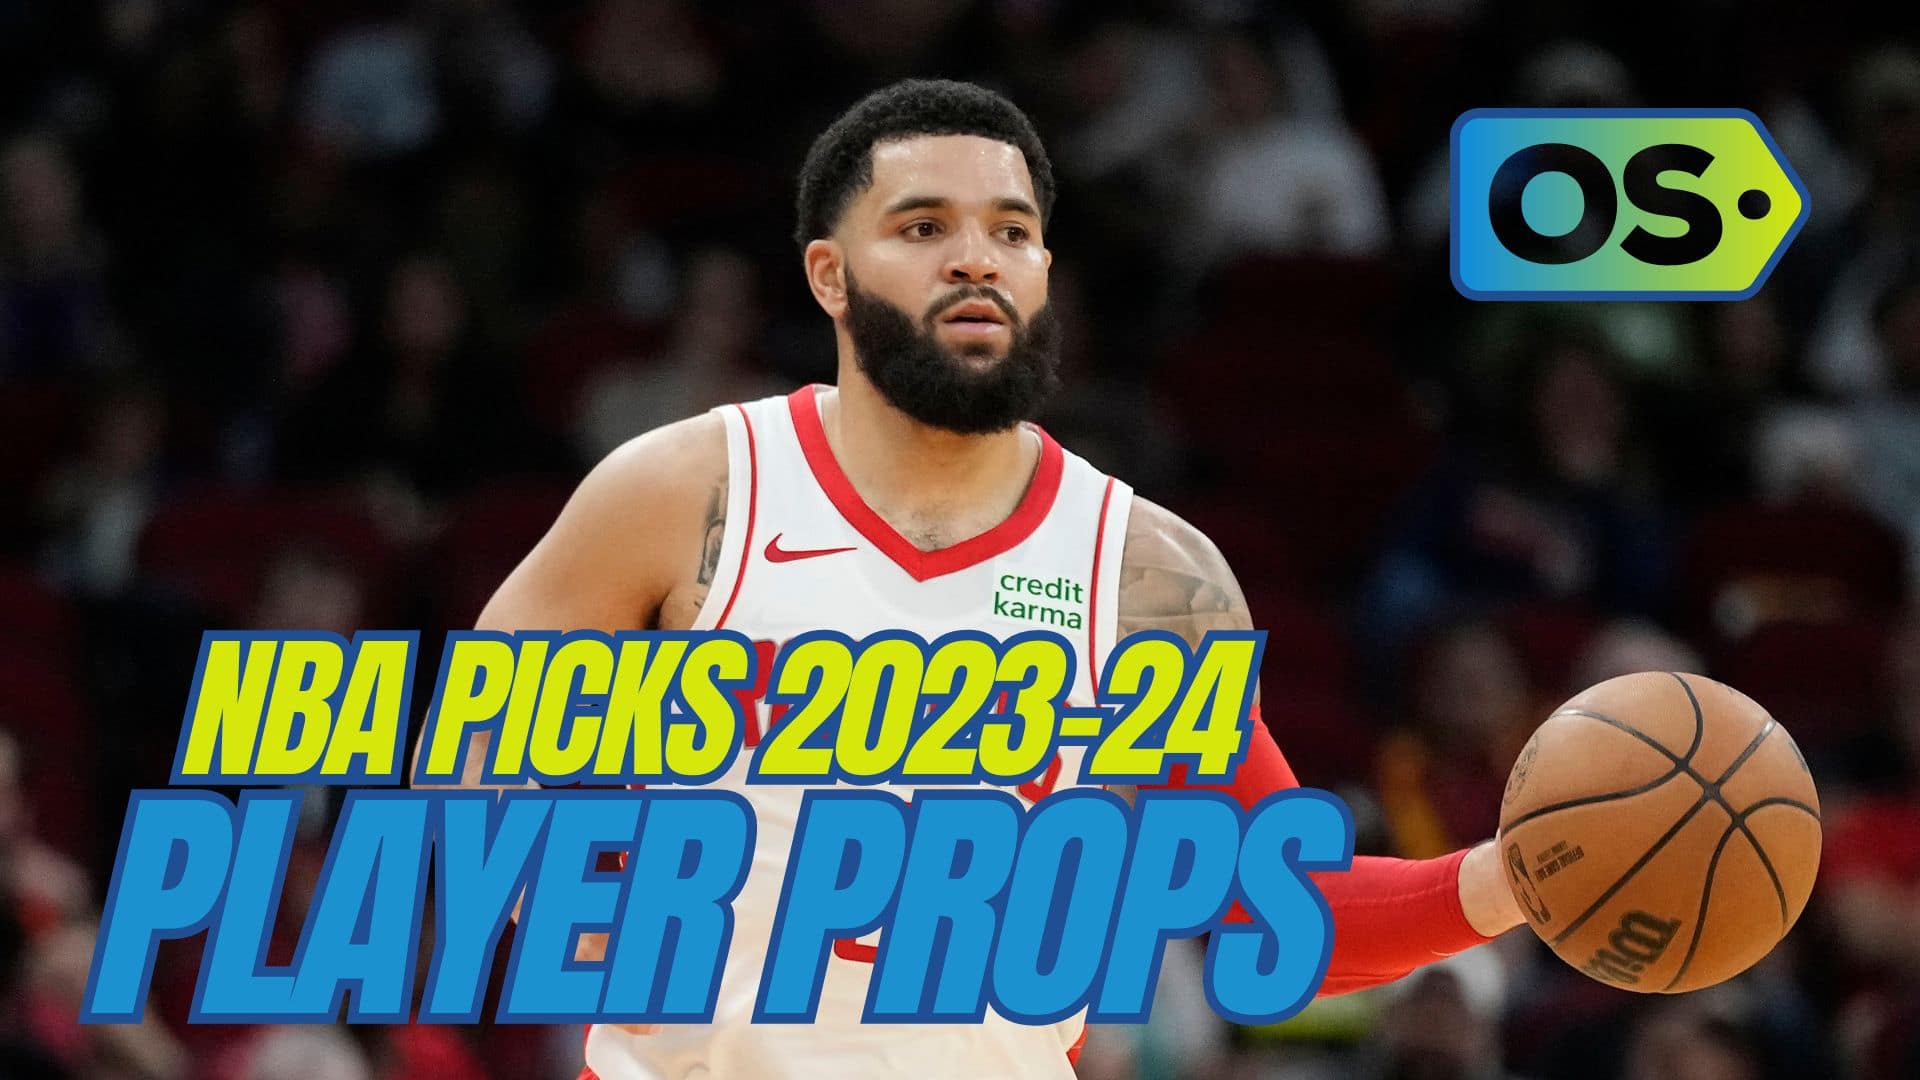 The best NBA player prop bets and picks today for Tuesday, March 12, include wagers on Fred VanVleet and Tyrese Haliburton.